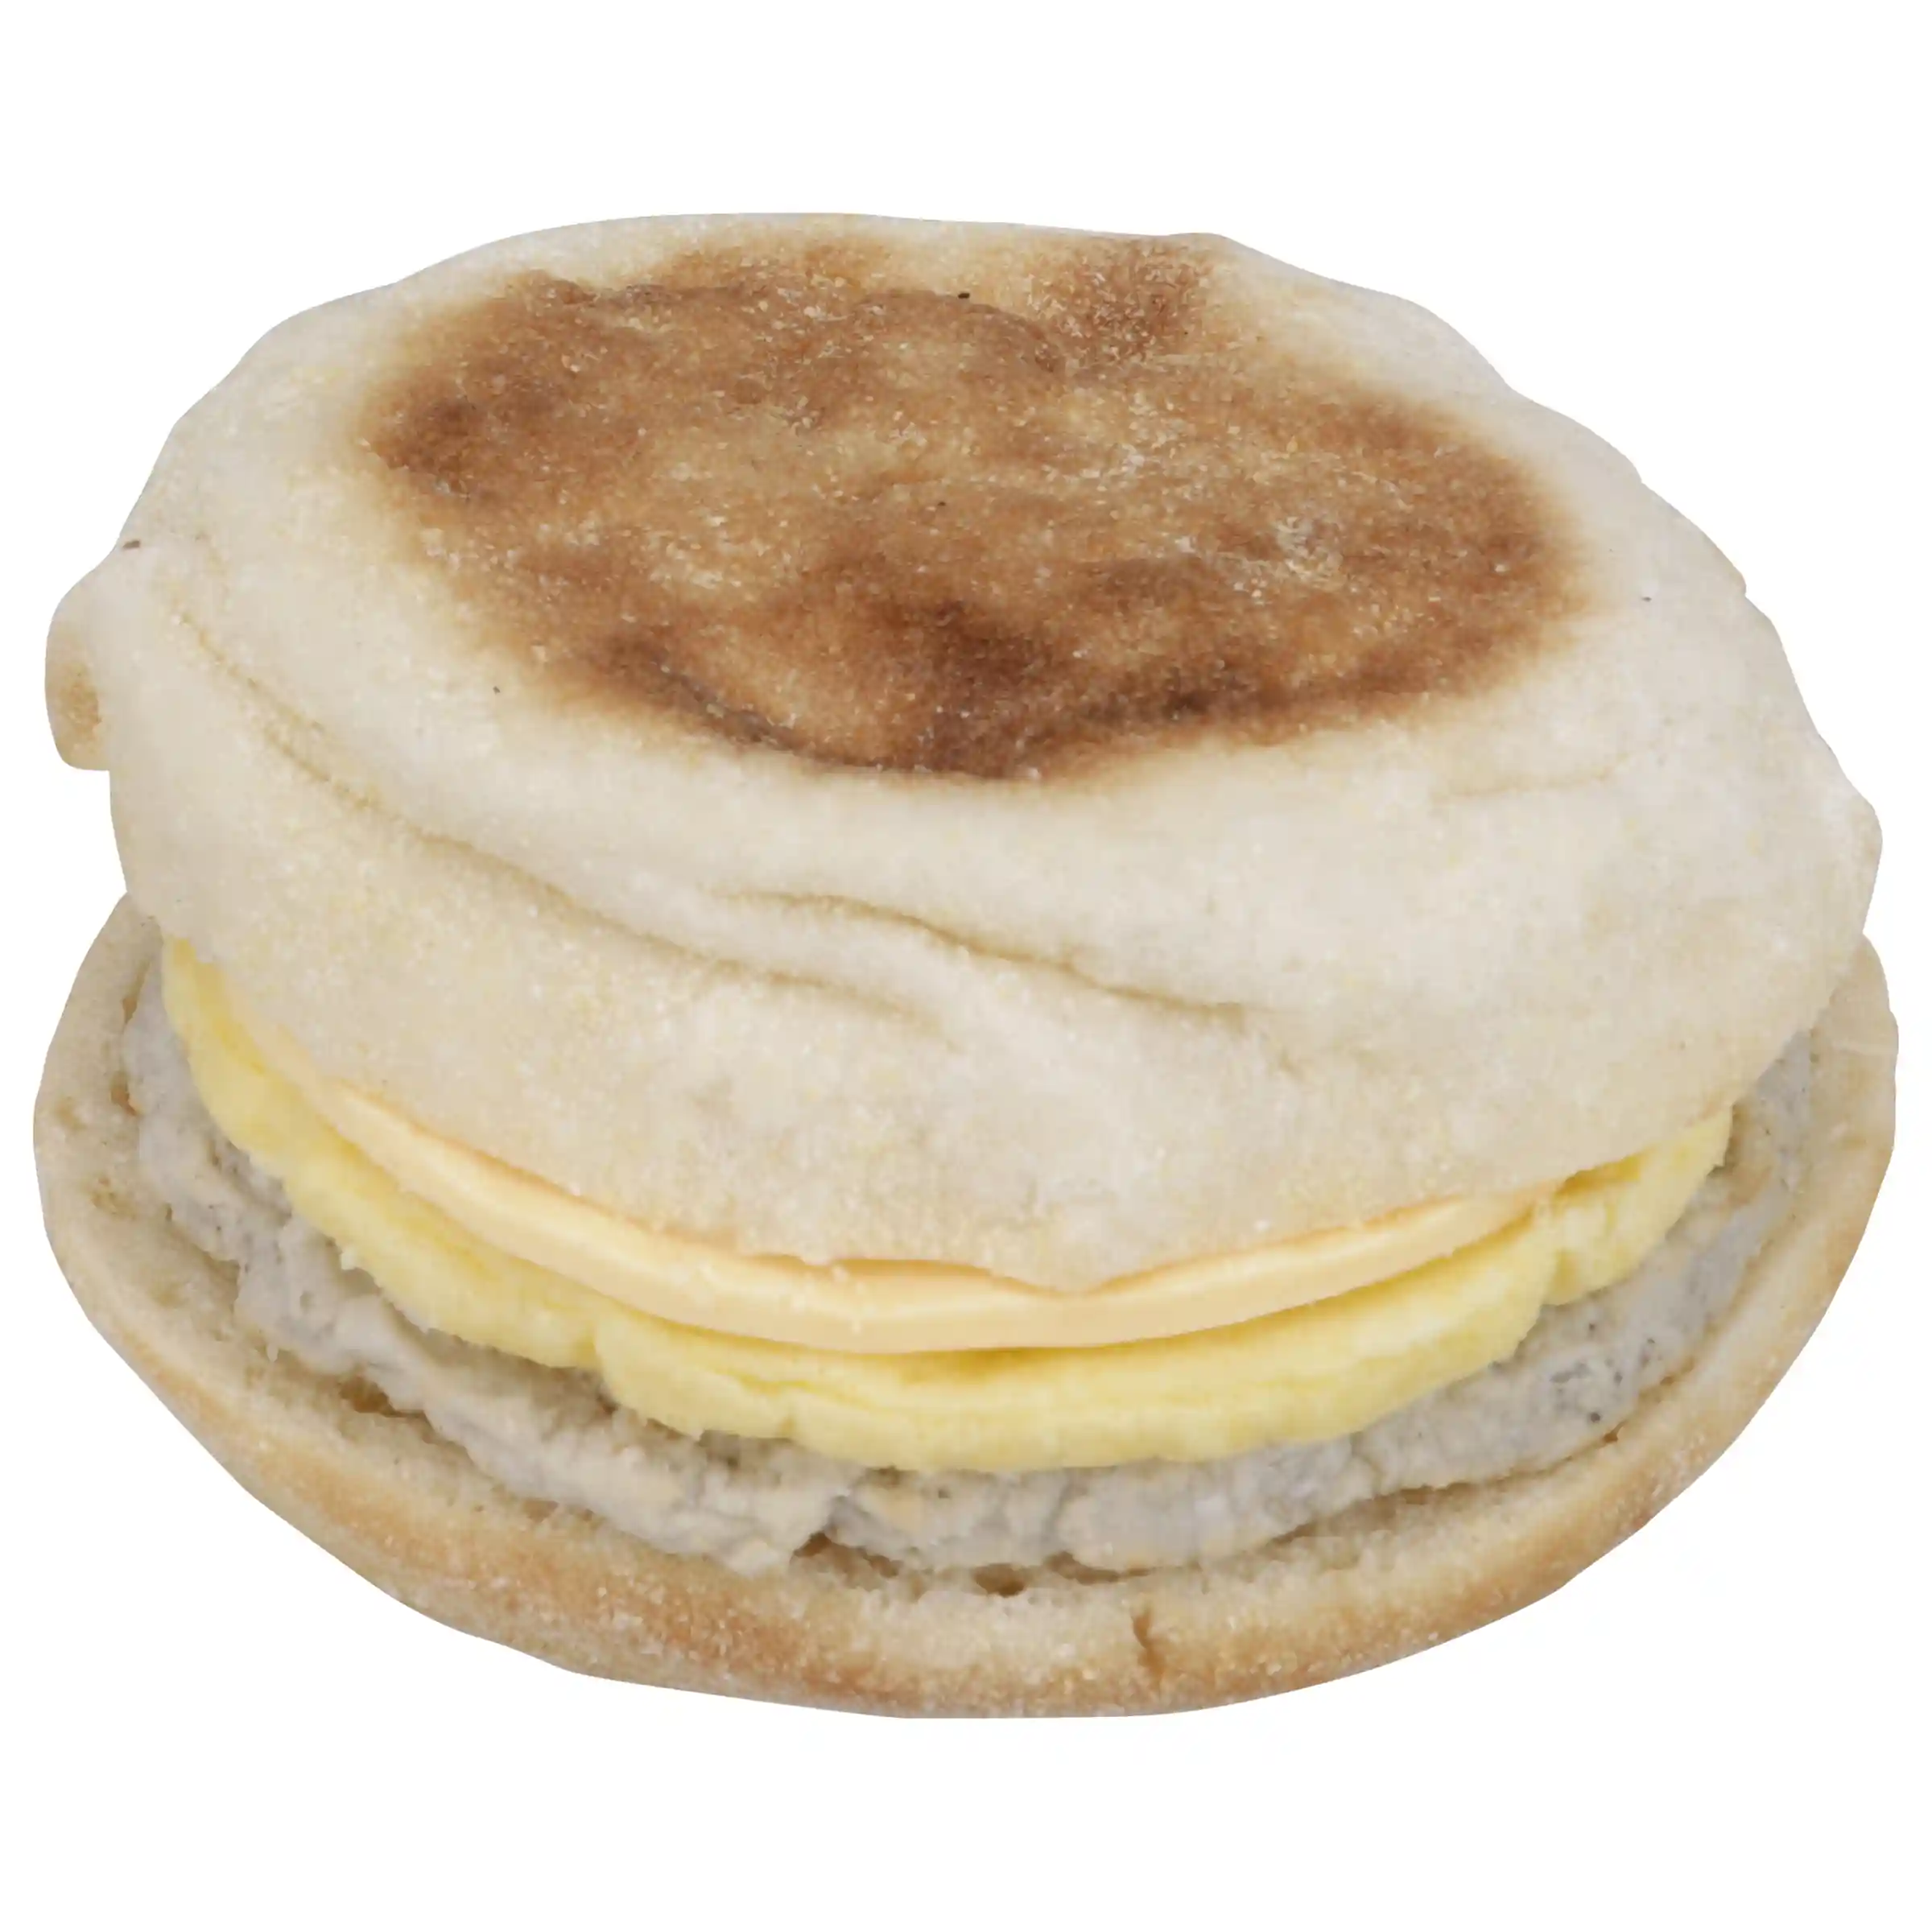 Jimmy Dean® Butcher Wrapped Sausage Egg and Cheese Muffin Sandwichhttps://images.salsify.com/image/upload/s--8yo4rf30--/q_25/tqisnlrqizvblqho38hn.webp